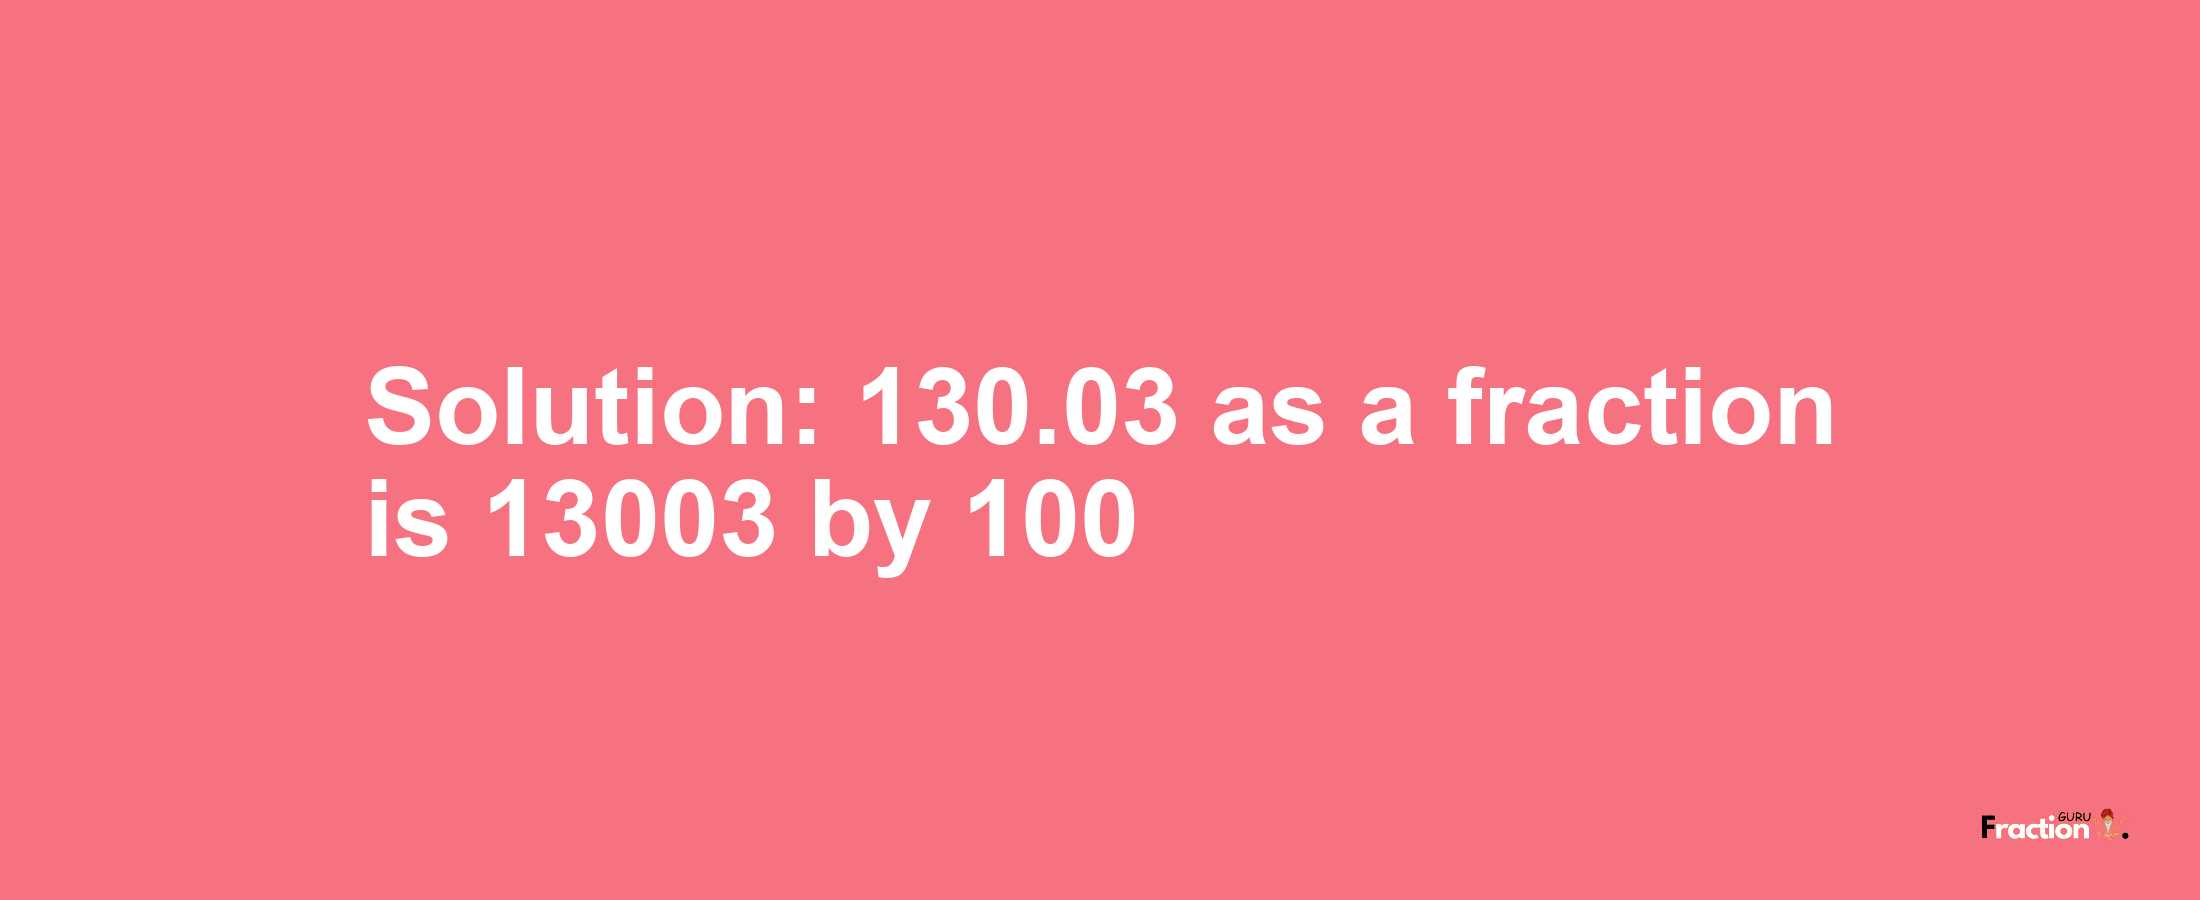 Solution:130.03 as a fraction is 13003/100